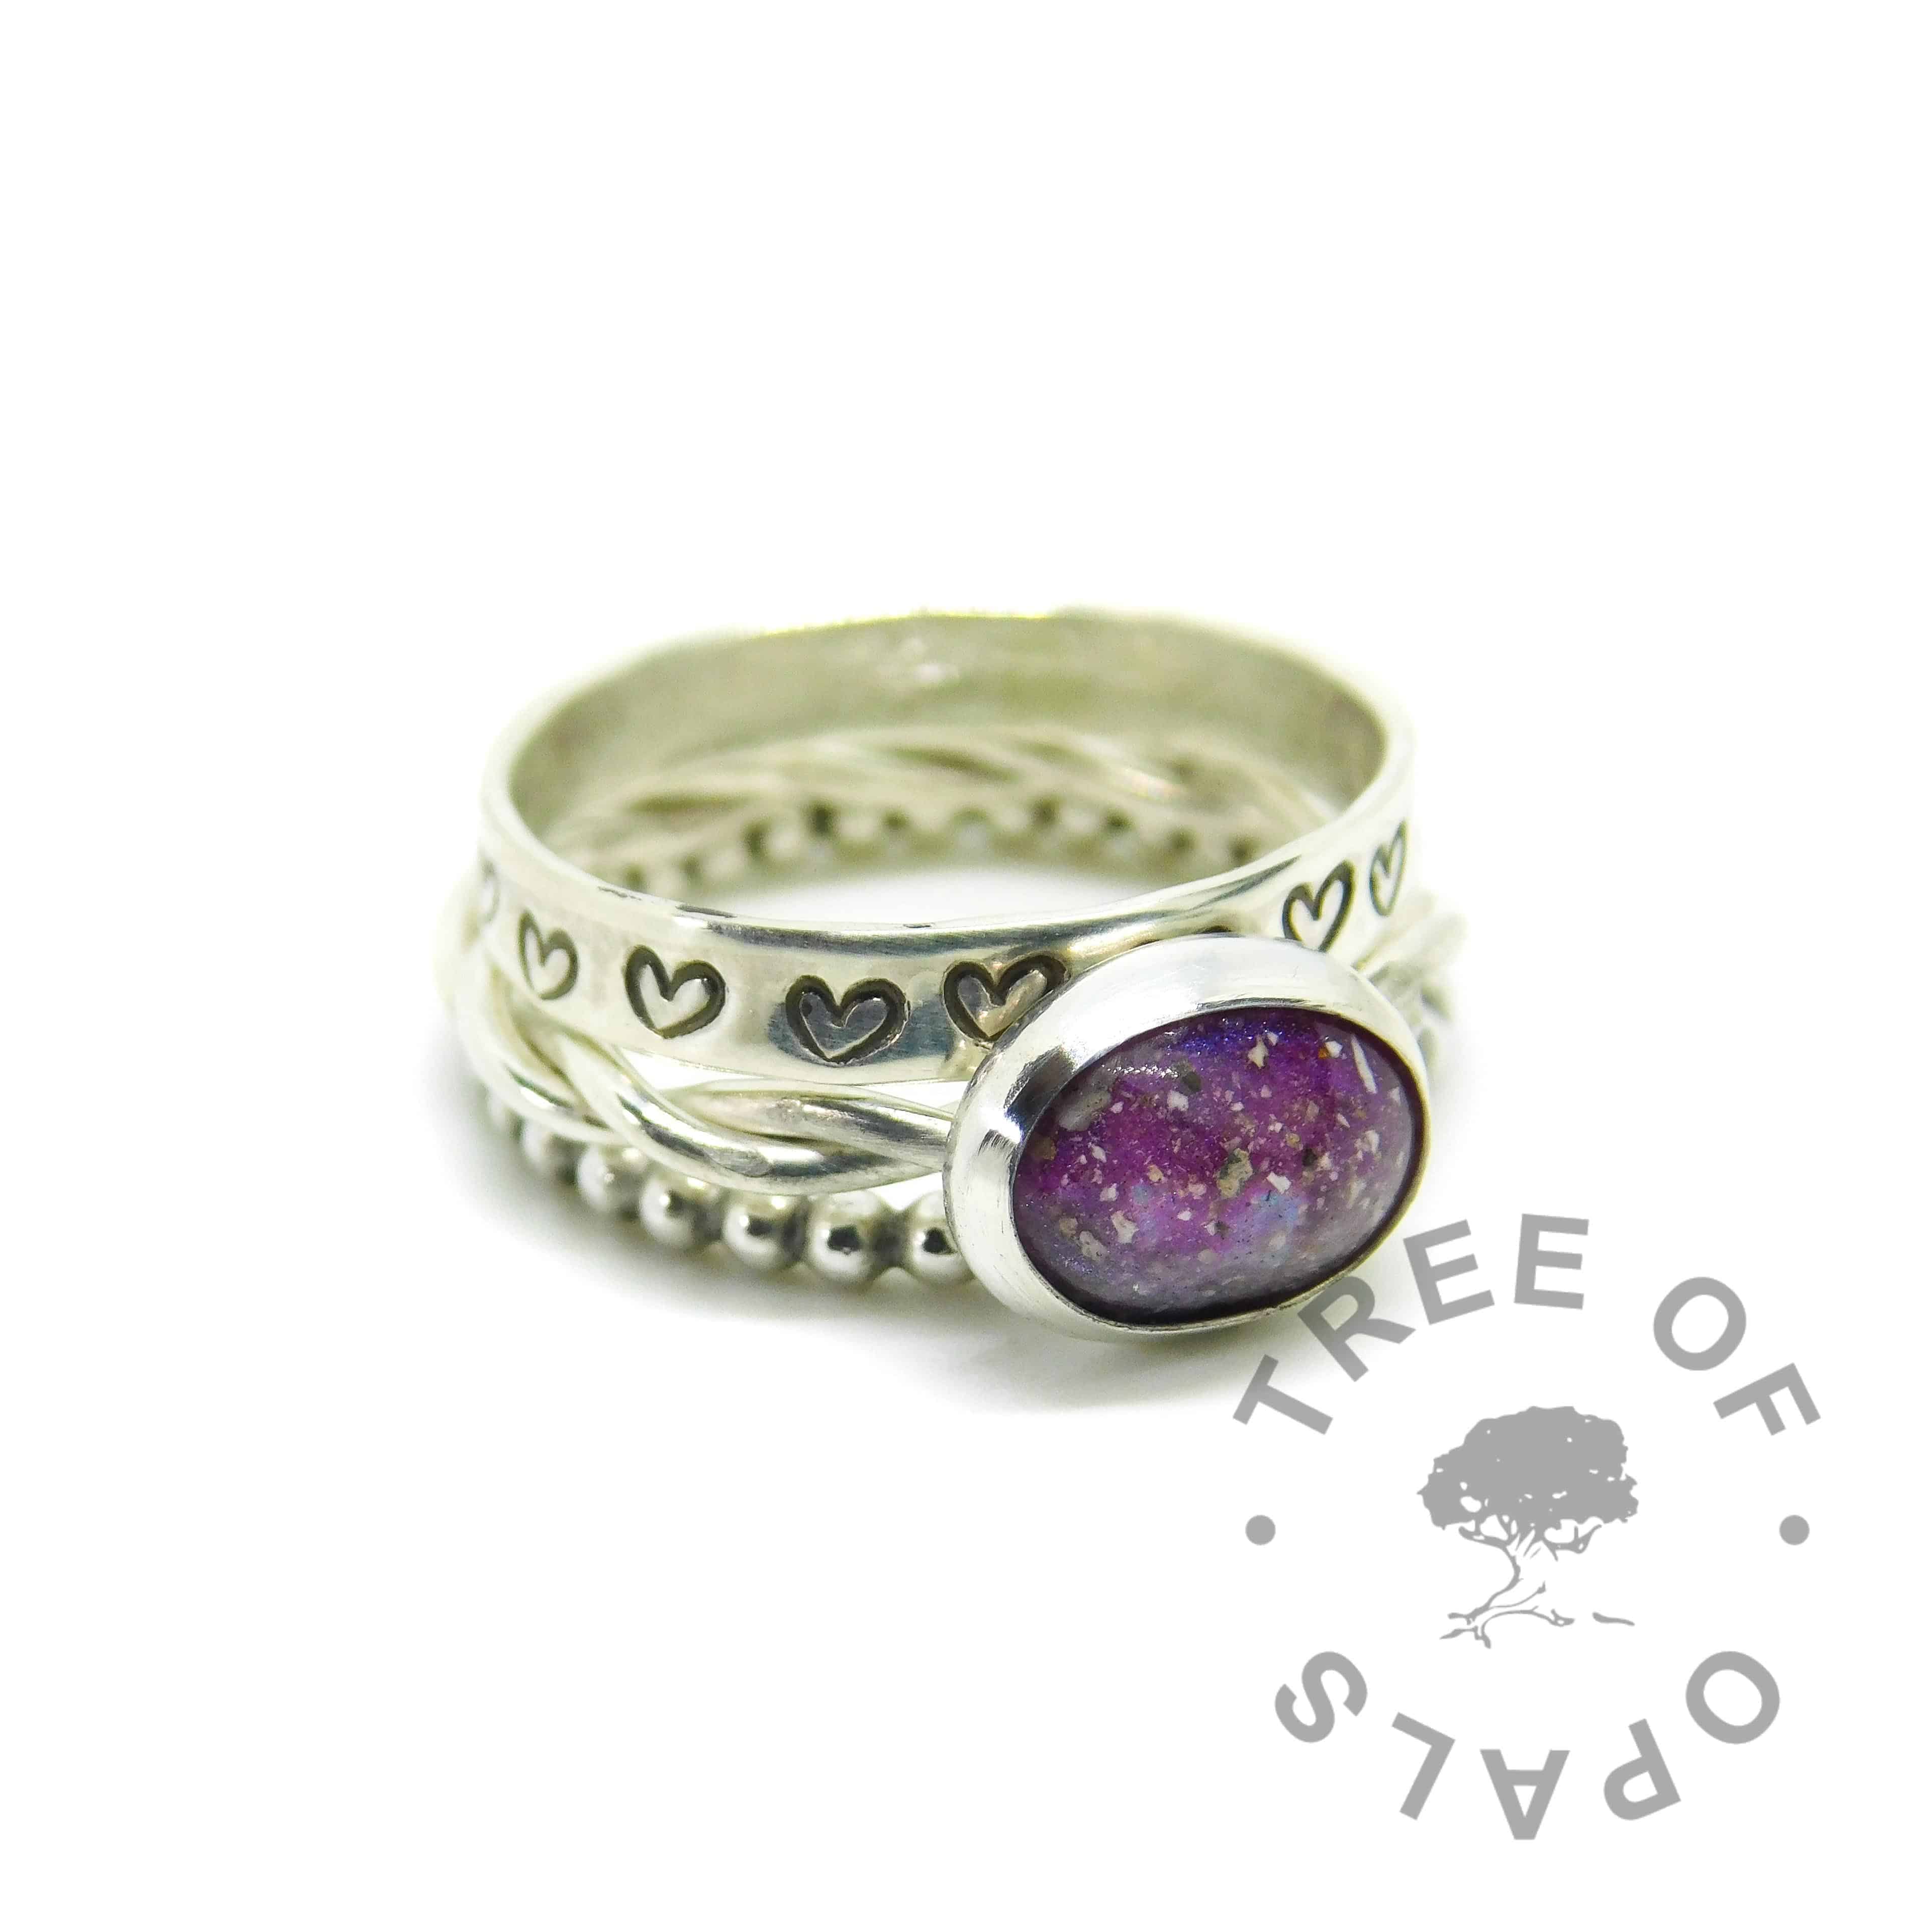 cremation ash ring with orchid purple and fairy pink resin sparkle mixes swirled together, no birthstone. Handmade twisted band EcoSilver ring shank, 10x8mm bezel cup. Shown with heart stamped and bubble wire stacking rings. Watermarked copyright Tree of Opals memorial jewellery image